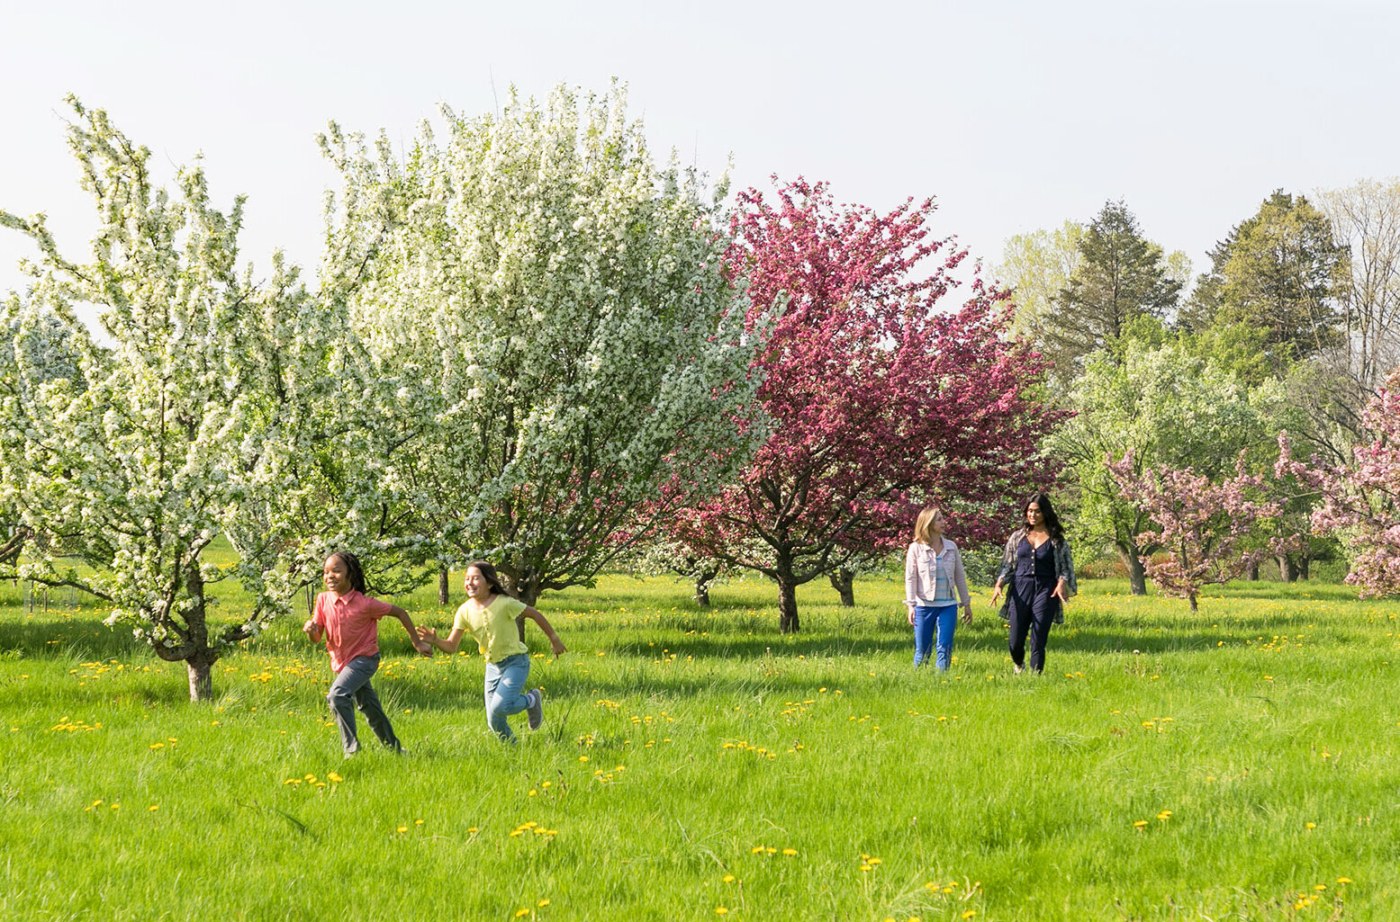 Children play tag among bloom trees in front of their mothers while walking through the Crabapple Collection in Spring